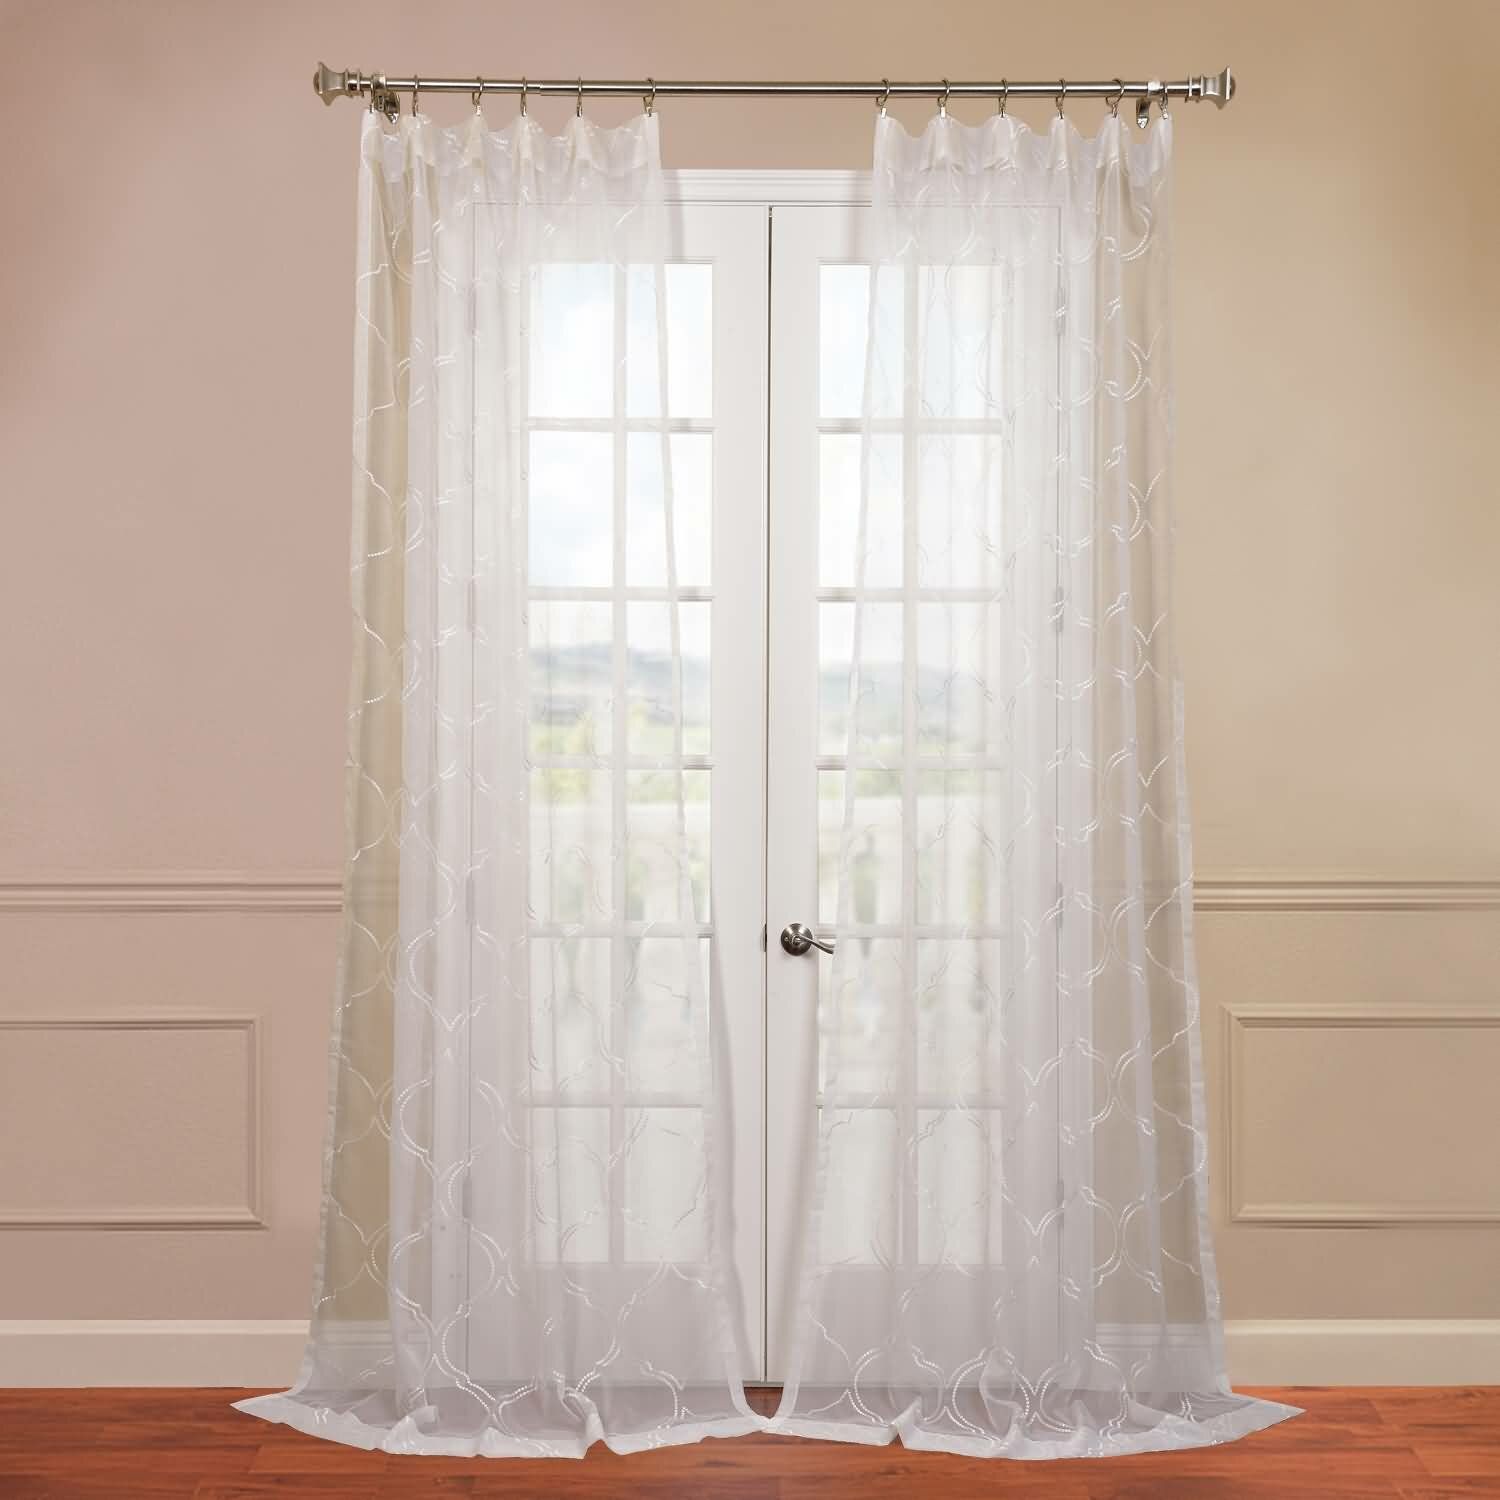 Kelling Geometric Sheer Rod Pocket Single Curtain Panel With Tassels Applique Sheer Rod Pocket Top Curtain Panel Pairs (View 23 of 30)